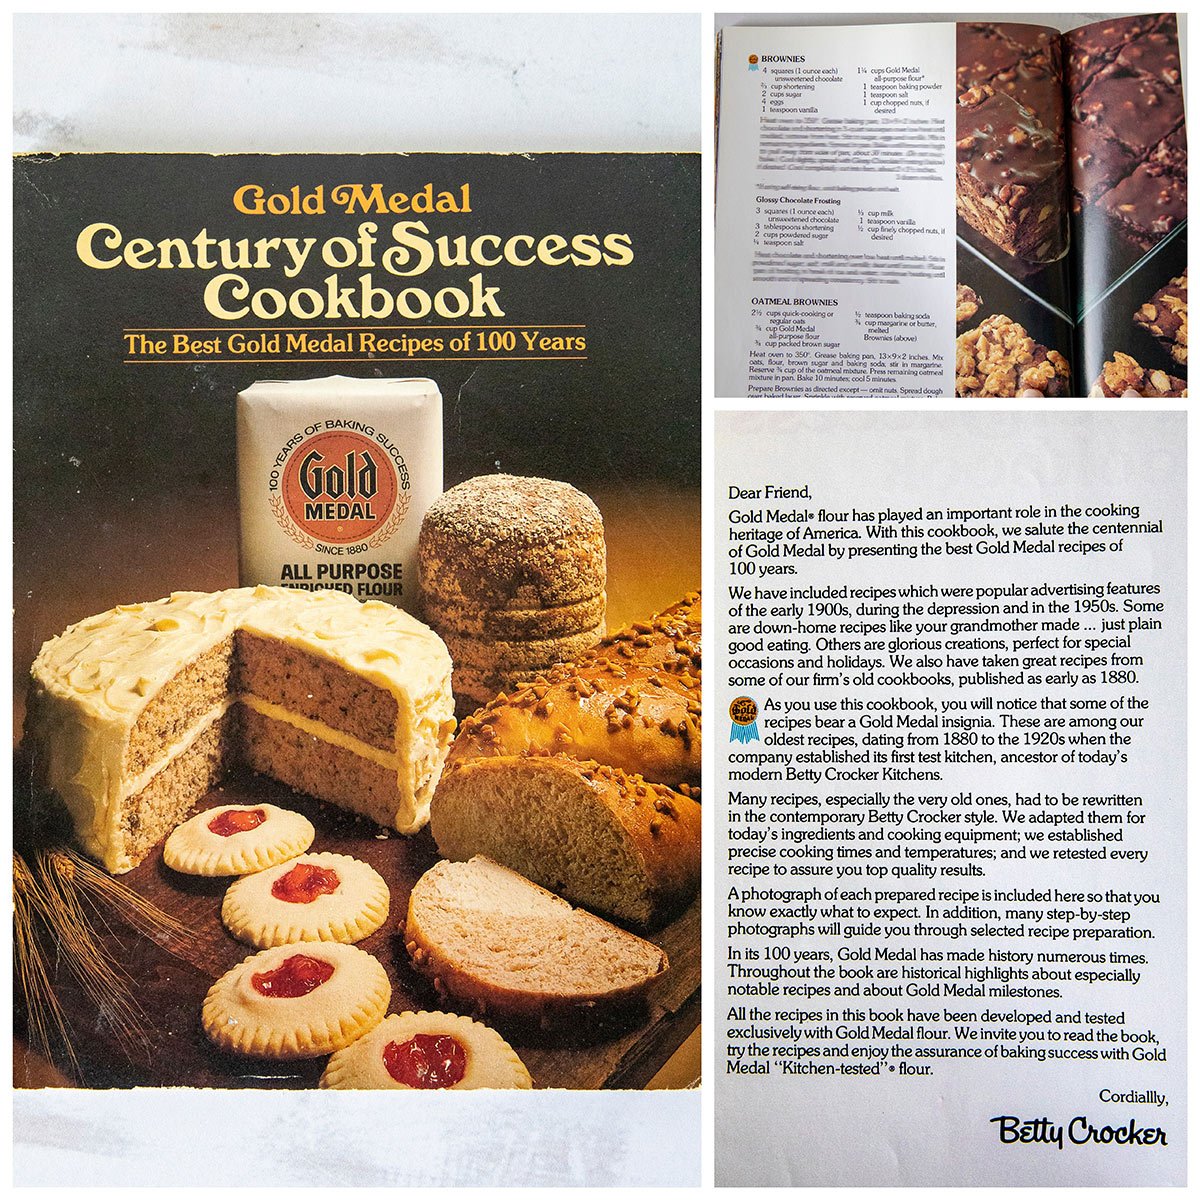 Gold Medal Century of Success Cookbook cover; brownie recipe and photo from the cookbook; and introduction of the cookbook